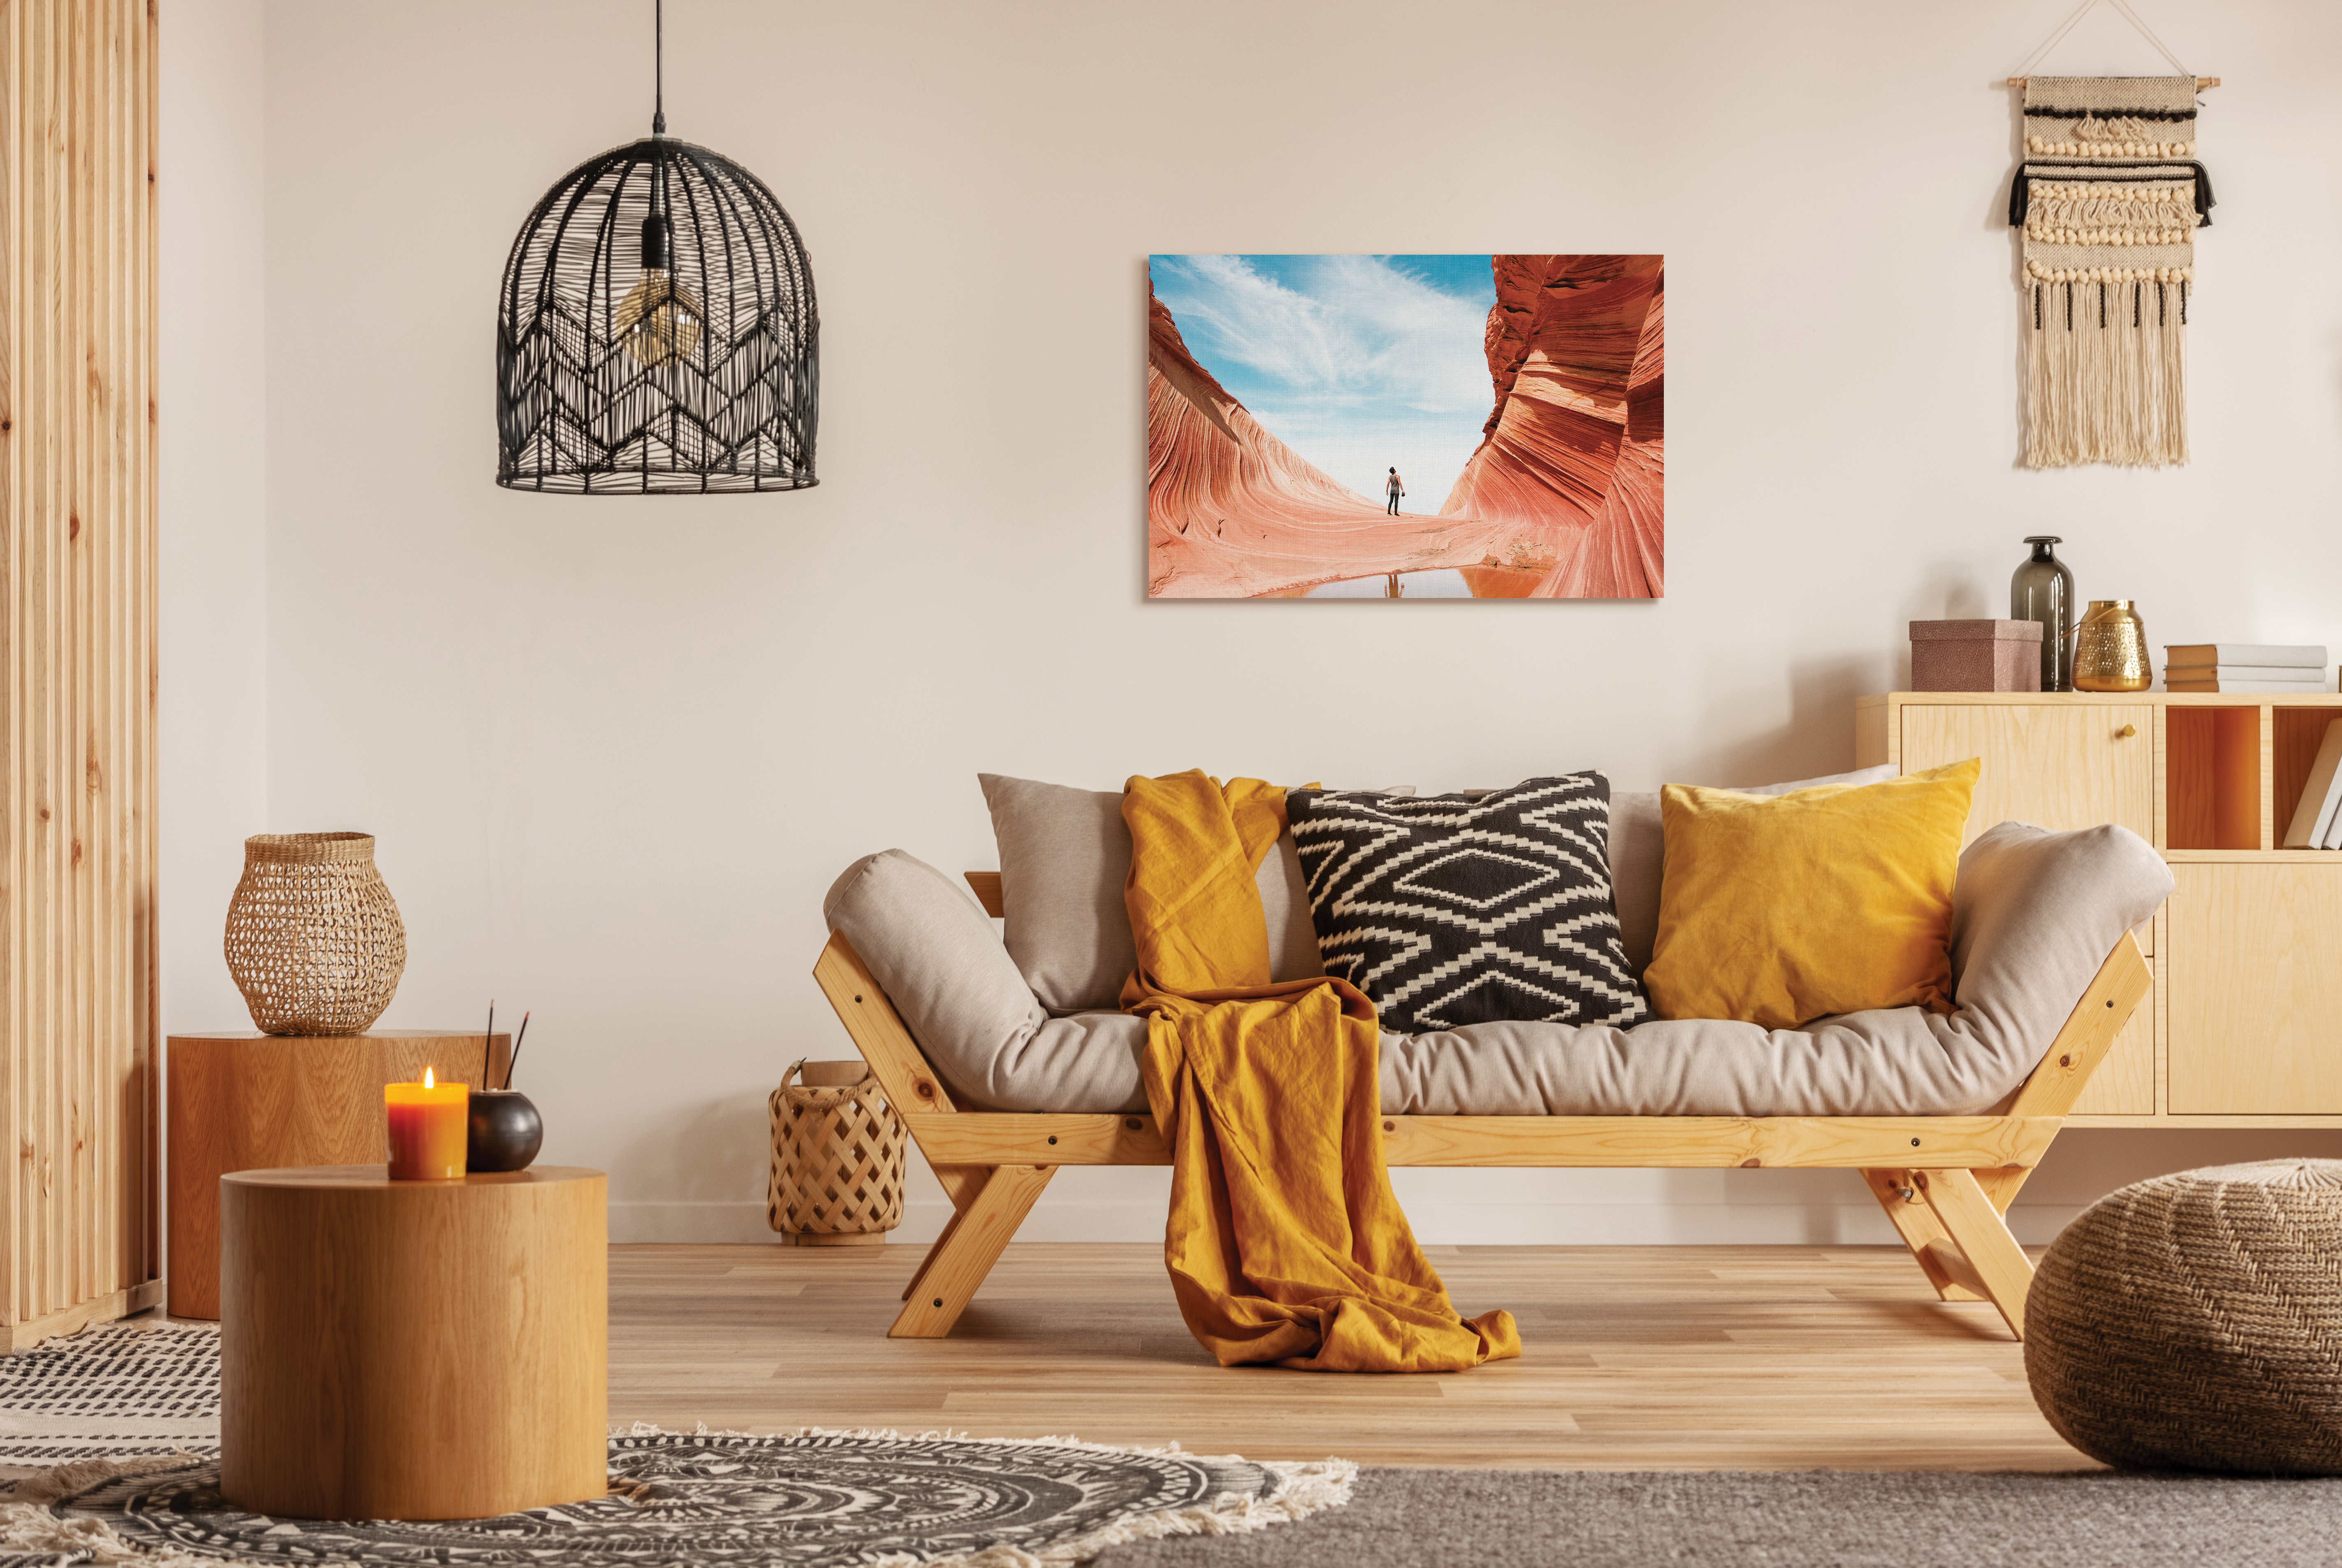 Canvas print of canyons in living room